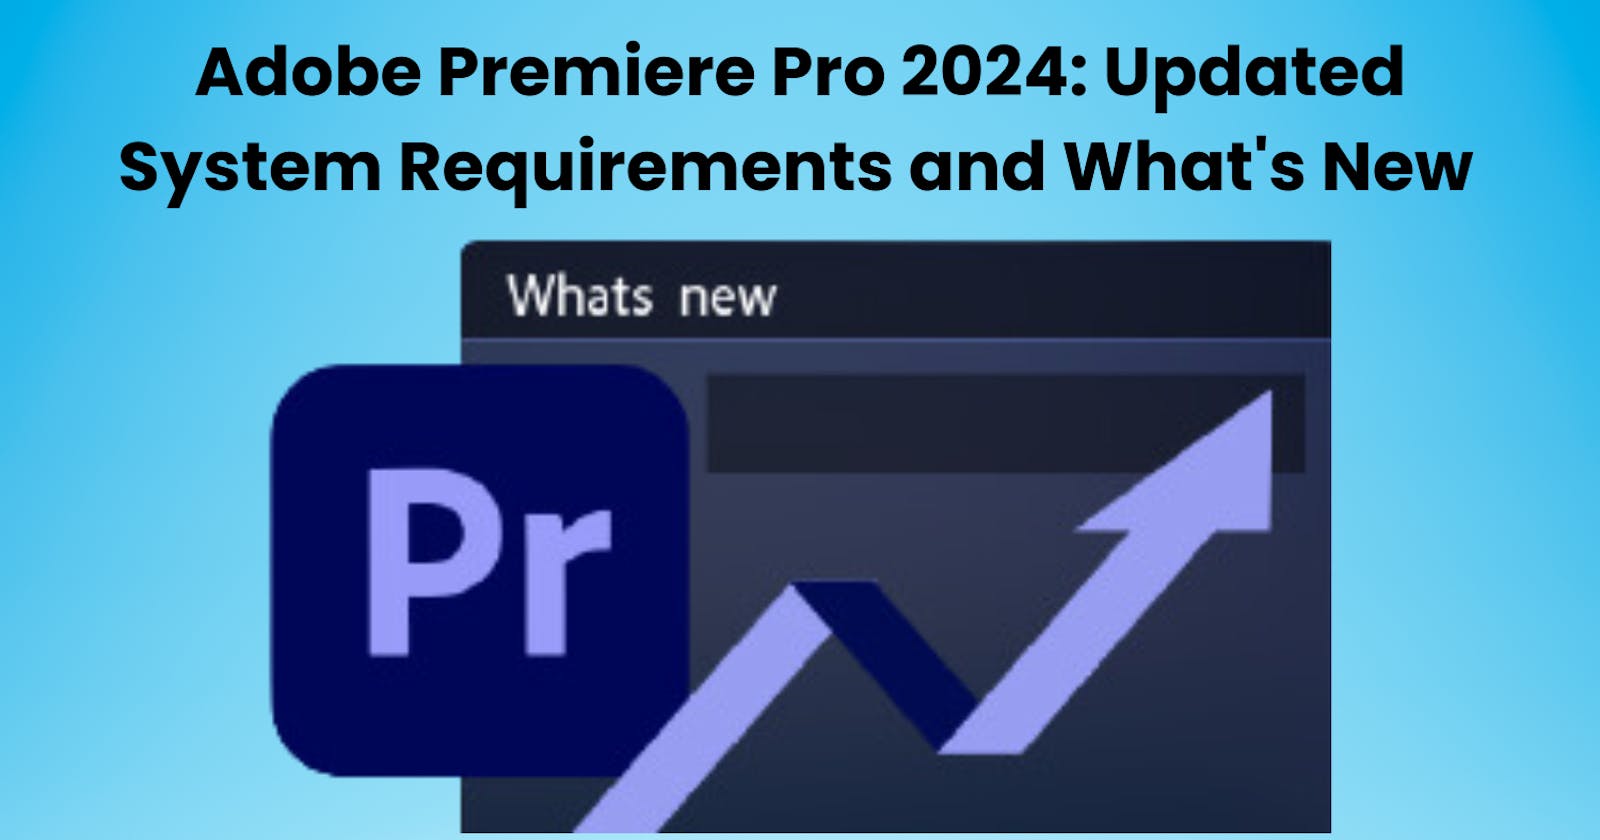 Adobe Premiere Pro 2024: Updated System Requirements and What's New